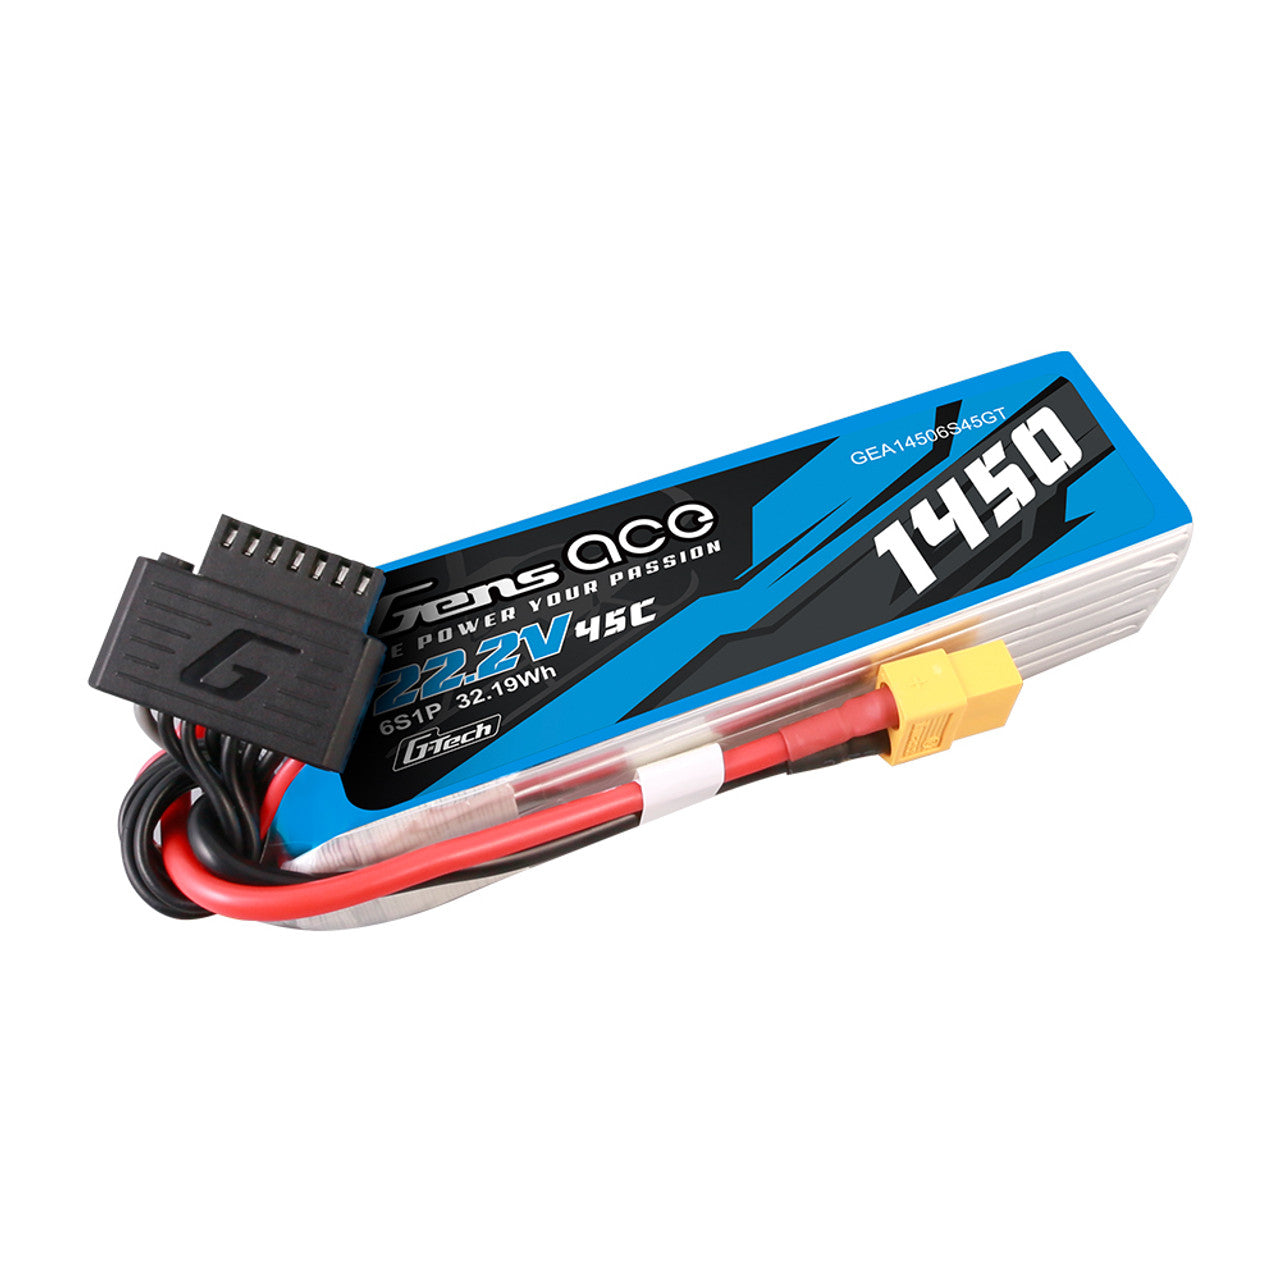 GEA14506S45GT Gens Ace 1450mAh 22.2V 45C 6S1P G-Tech Lipo Battery Pack With XT60 Plug